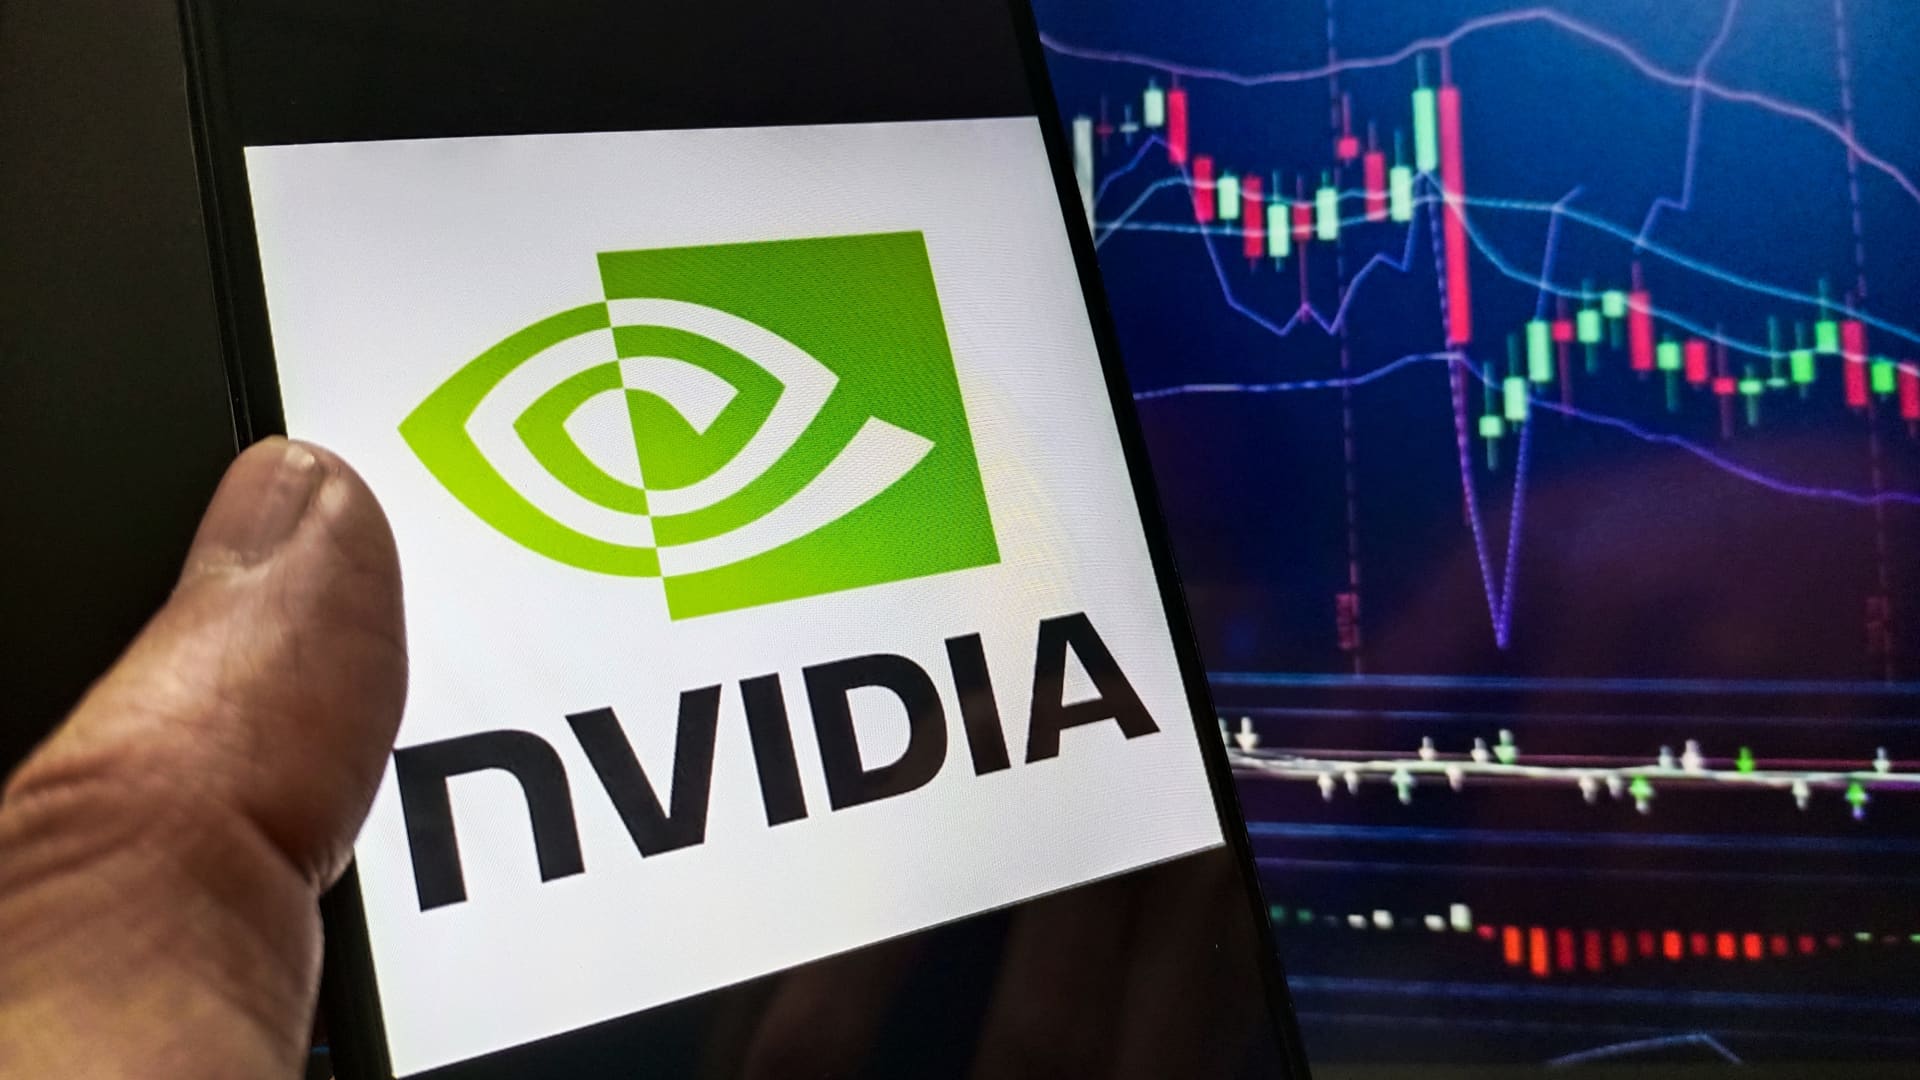 Here are the 6 stocks that rise when Nvidia shares fall - CNBC